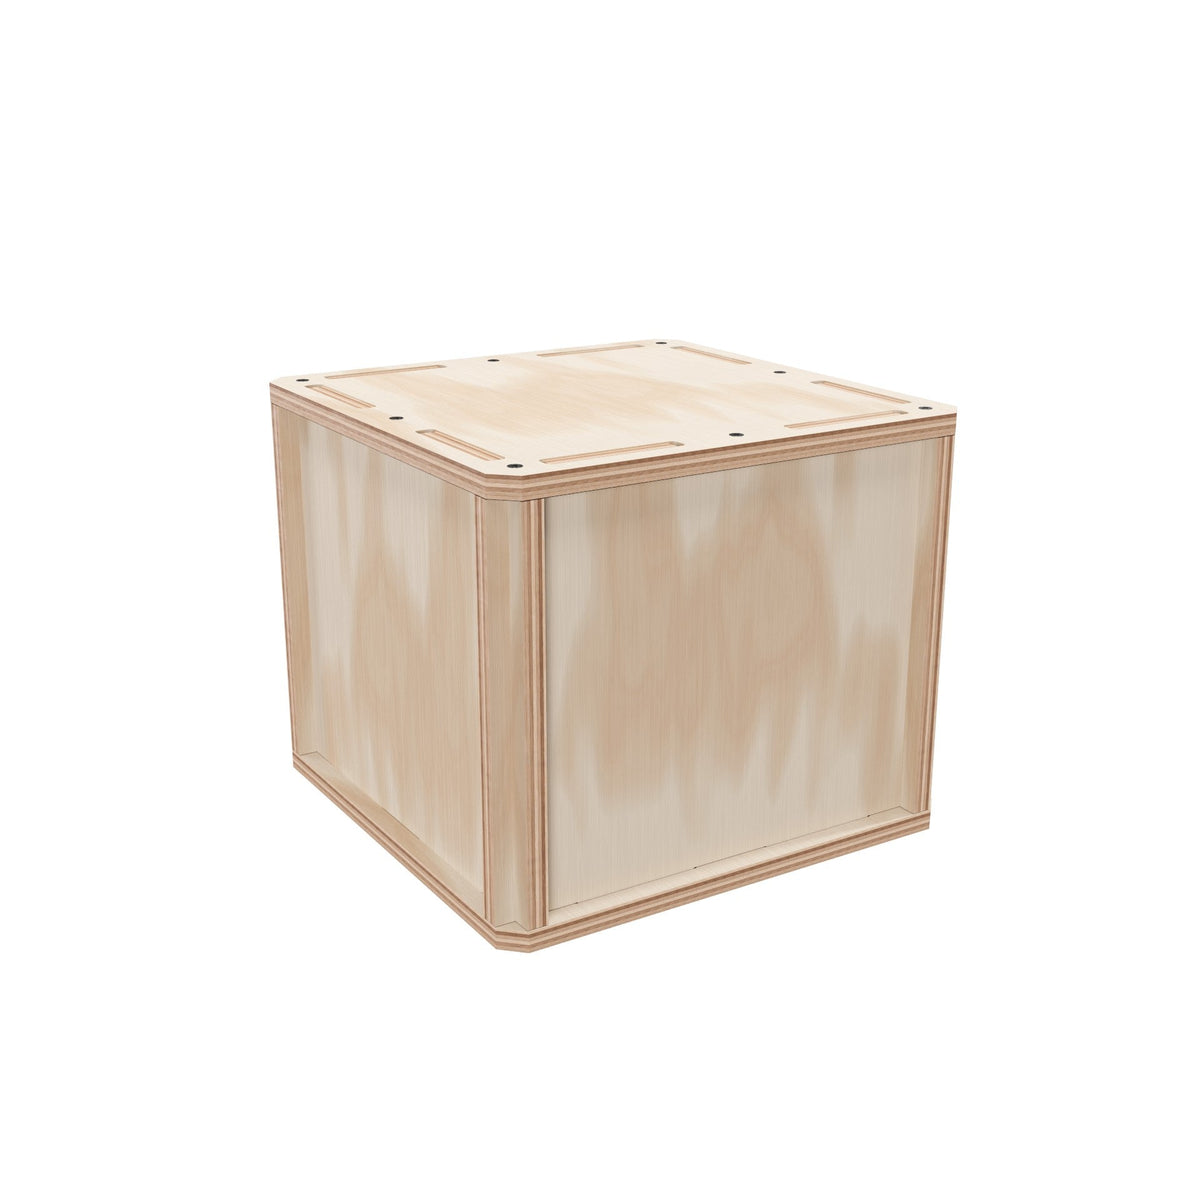 Plywood Shipping Crate 12x12x10